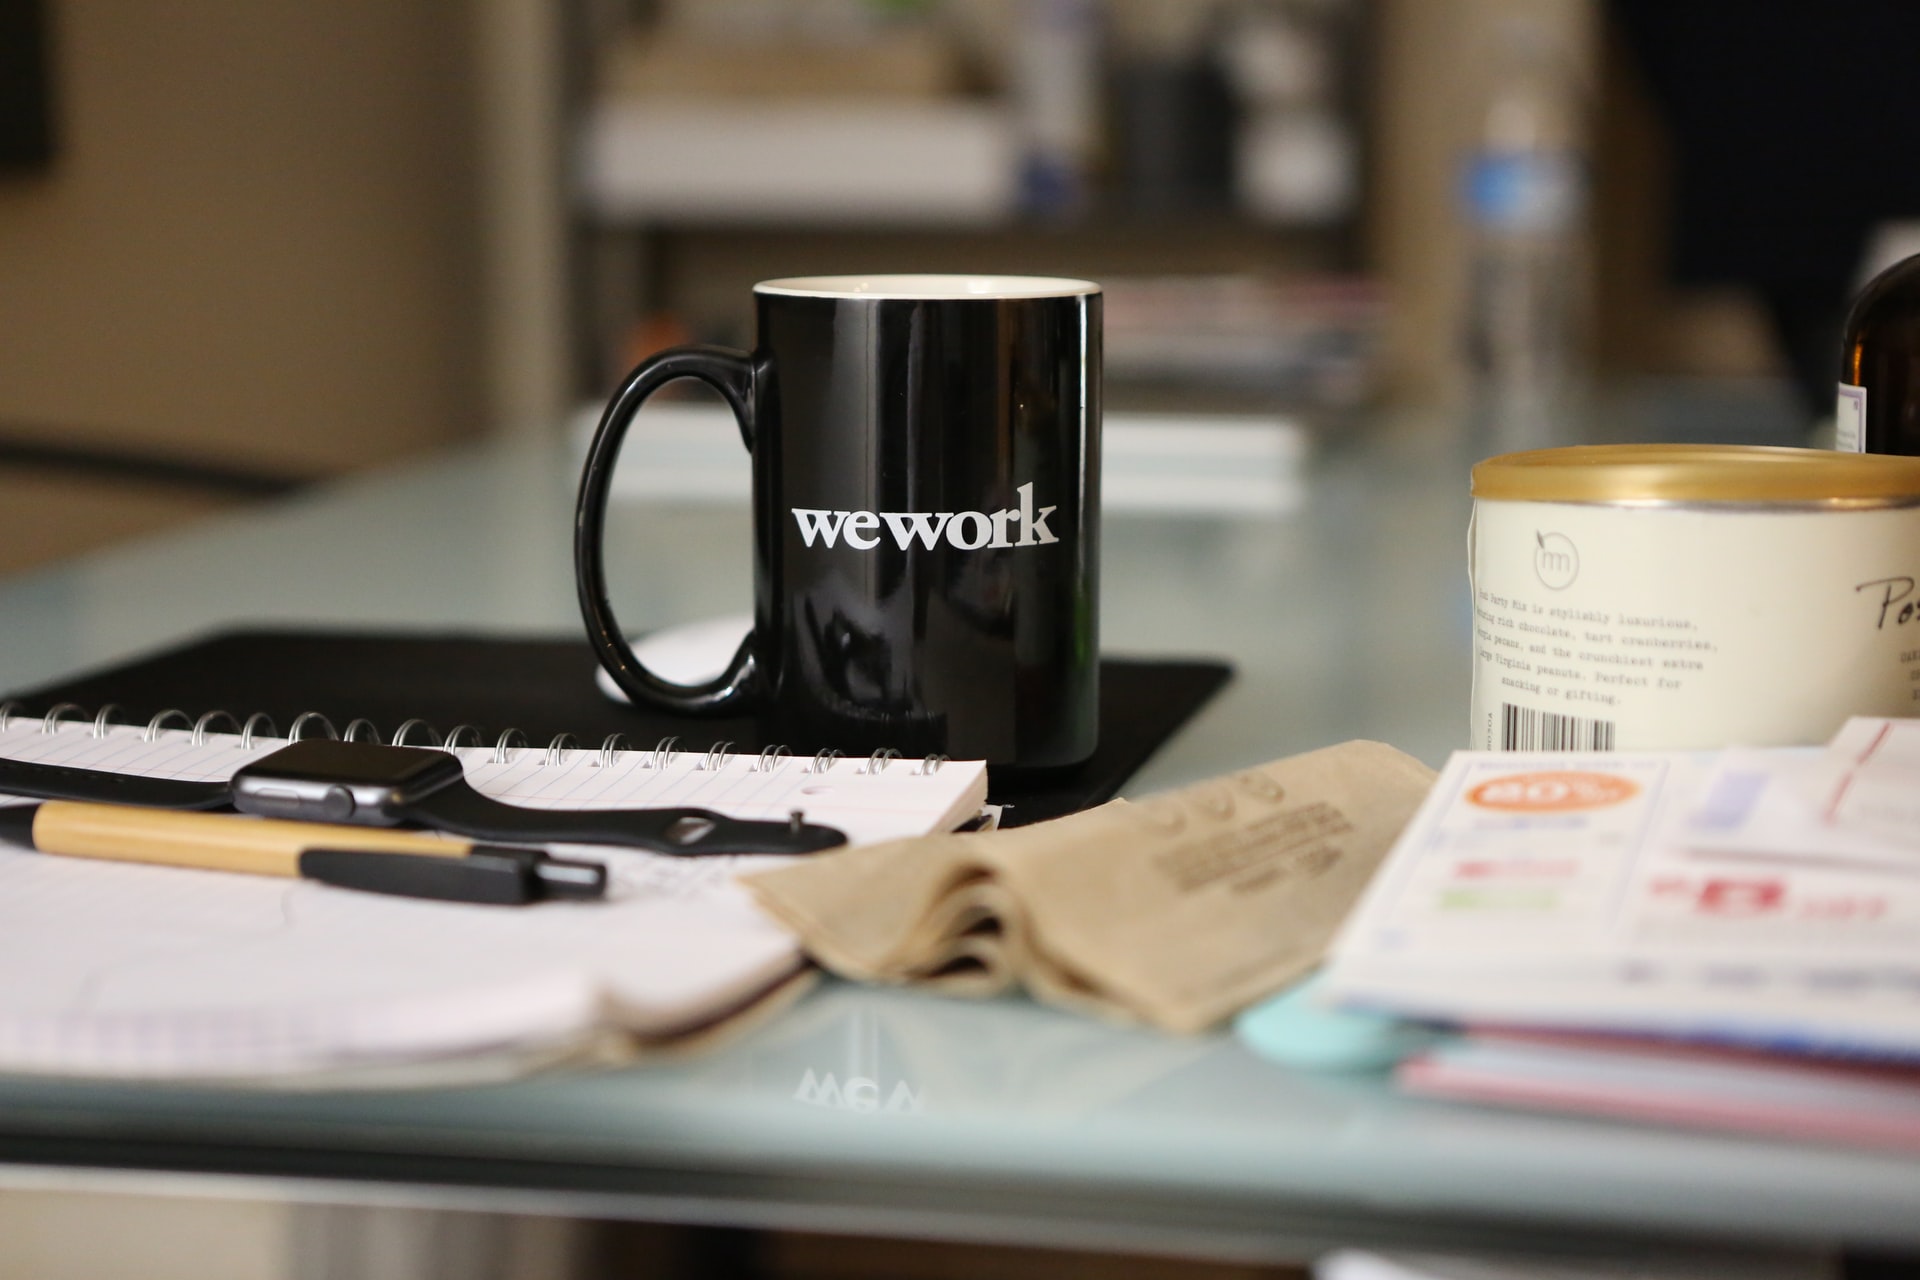 ‘WeWork’: The World’s Largest Startup Unicorn… Except It Isn’t